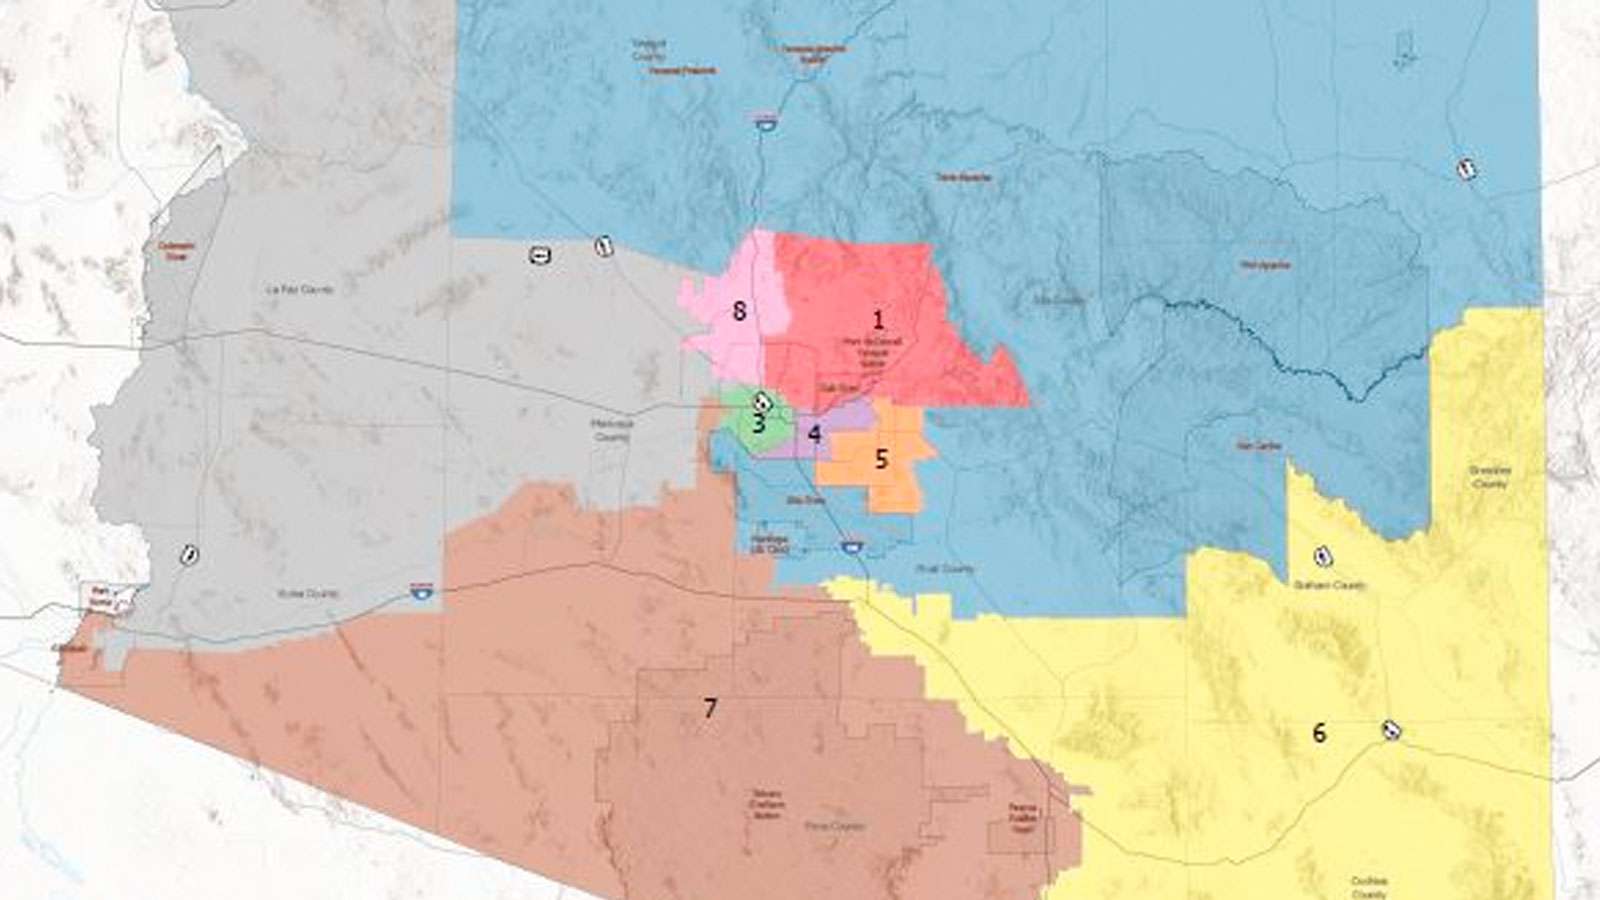 Arizona redistricting panel approves Republican-leaning congressional map